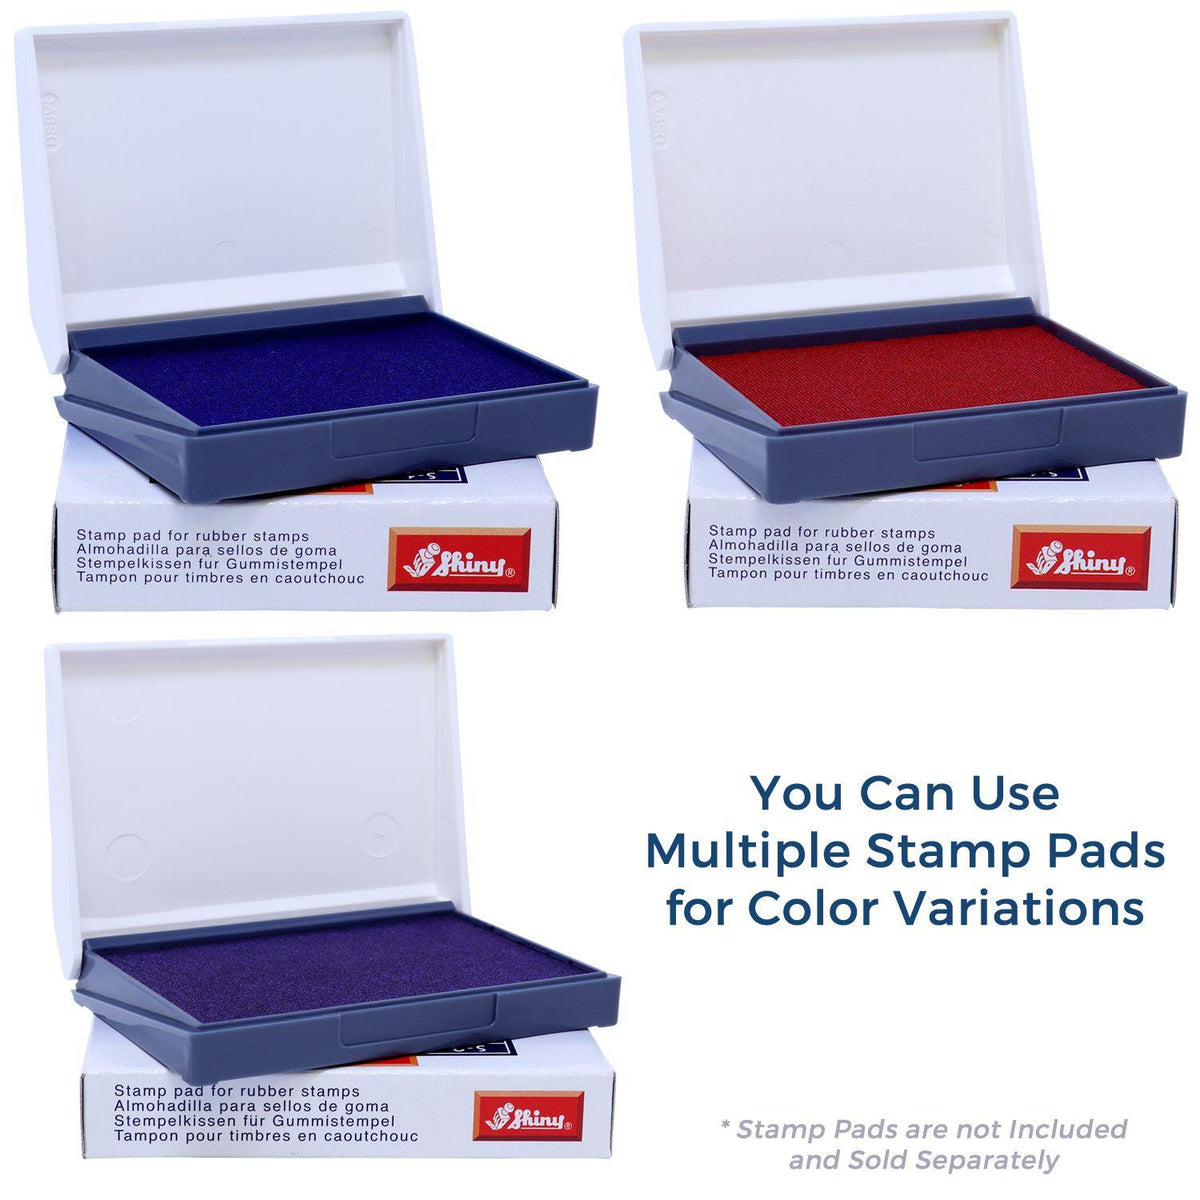 Stamp Pads for Covid-19 Rubber Stamp Available